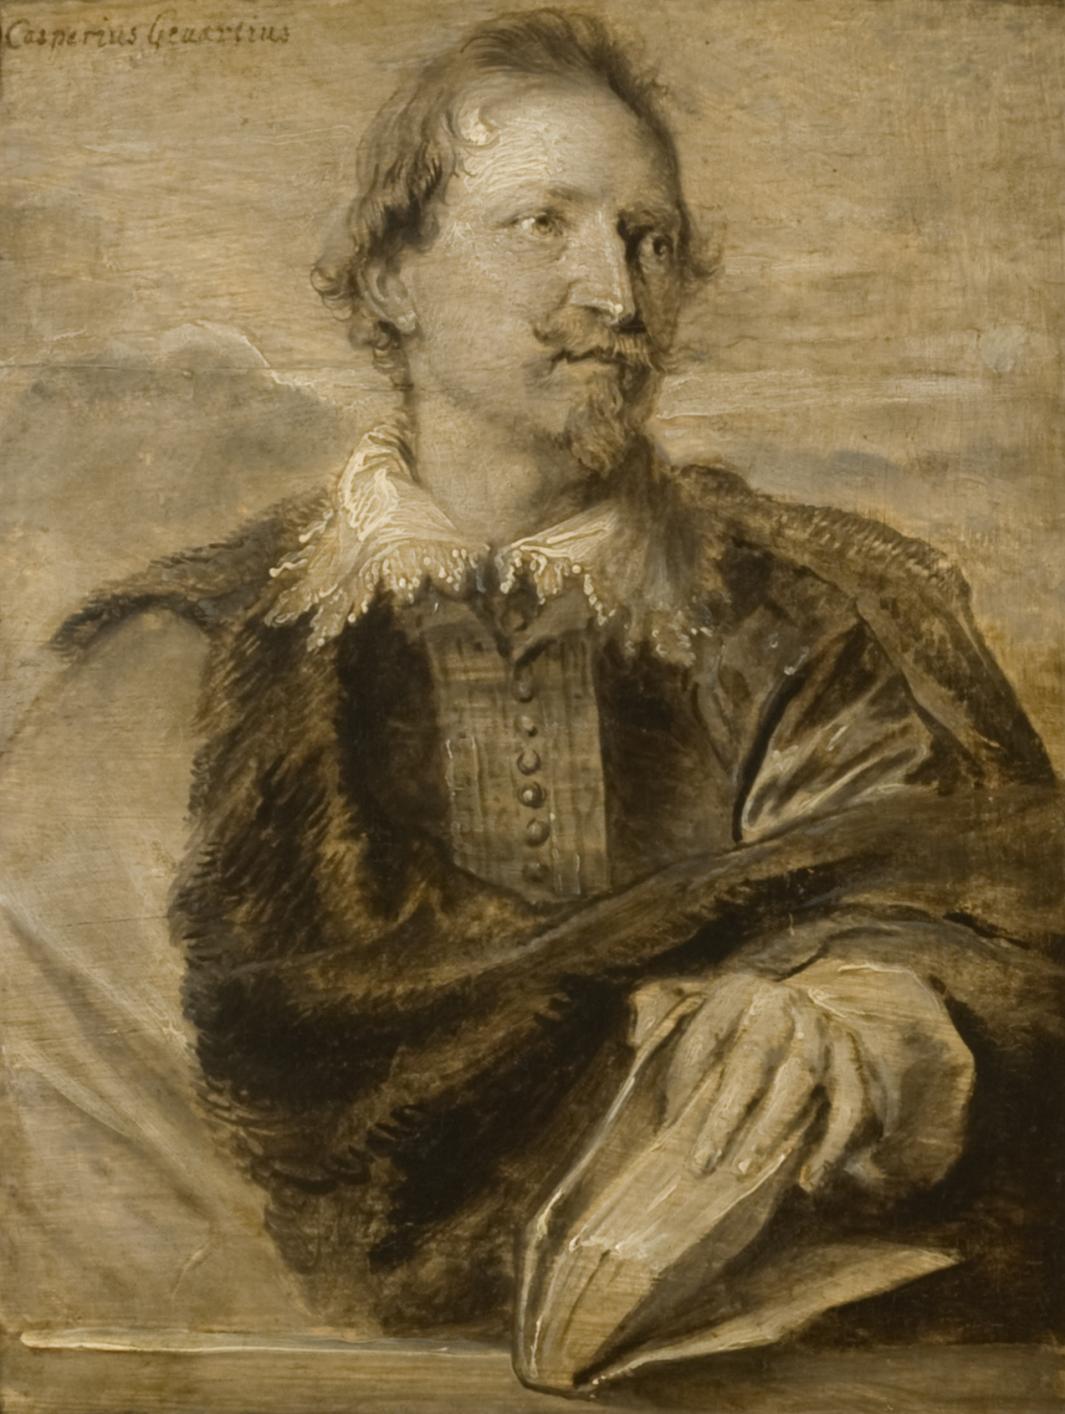 oil painting in brown tones of man wearing buttoned shirt, fur and lace collar and hand in book